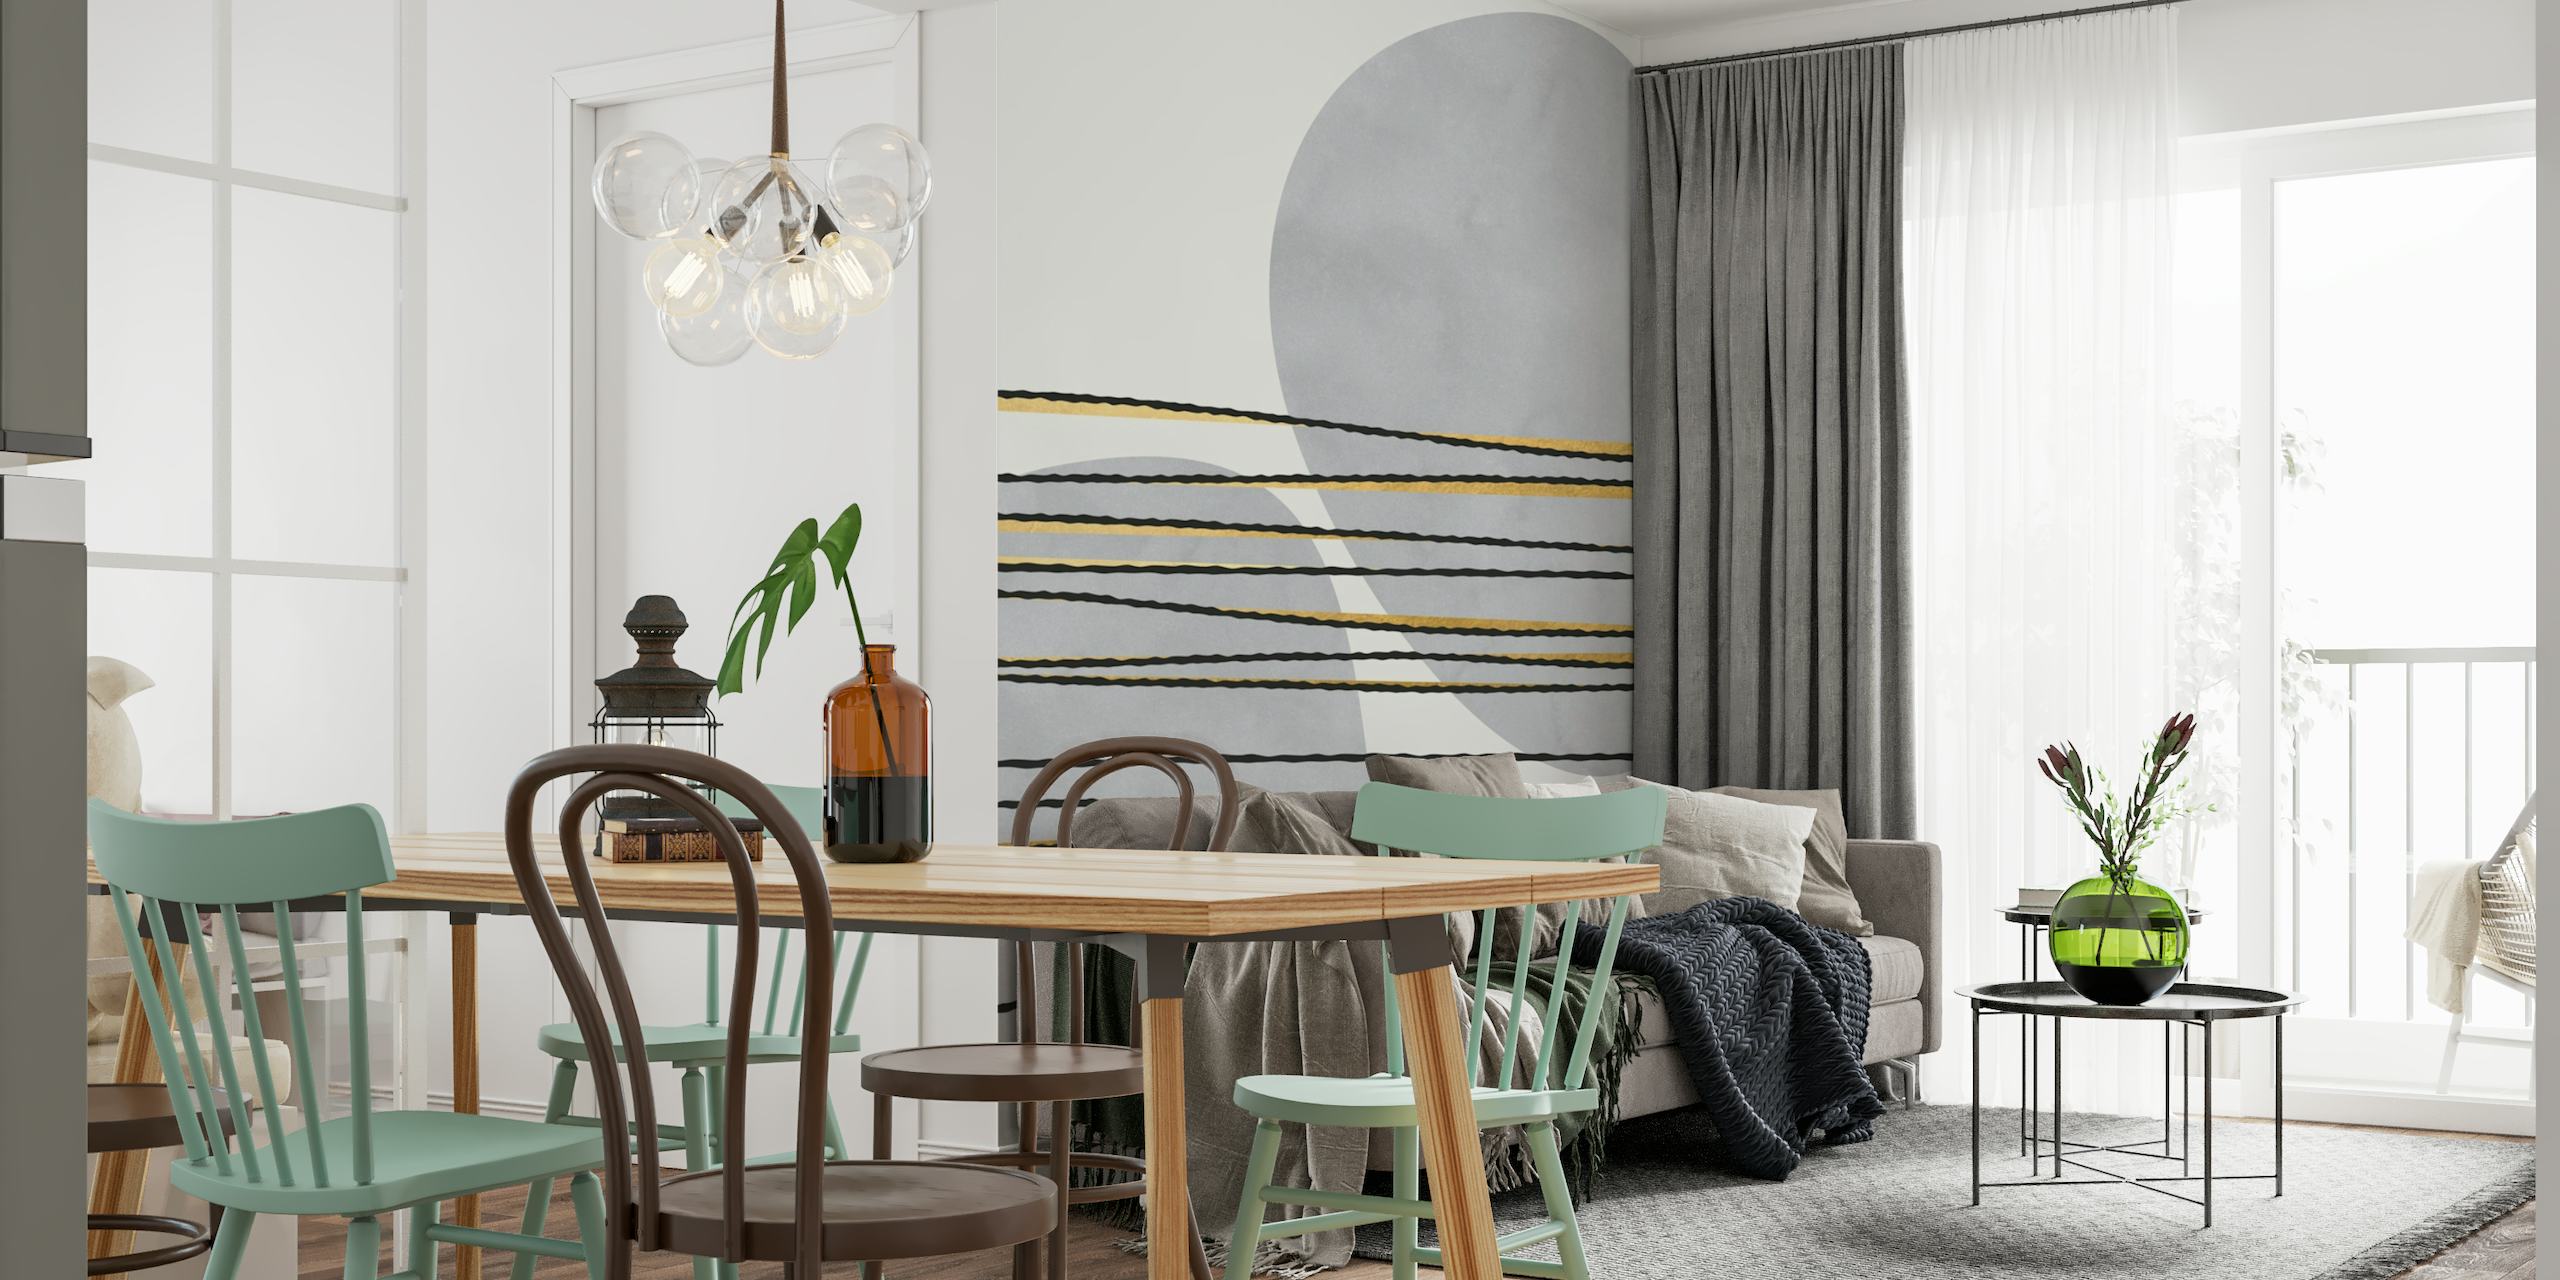 Gilded lines and shapes in gray wall mural with gold accents